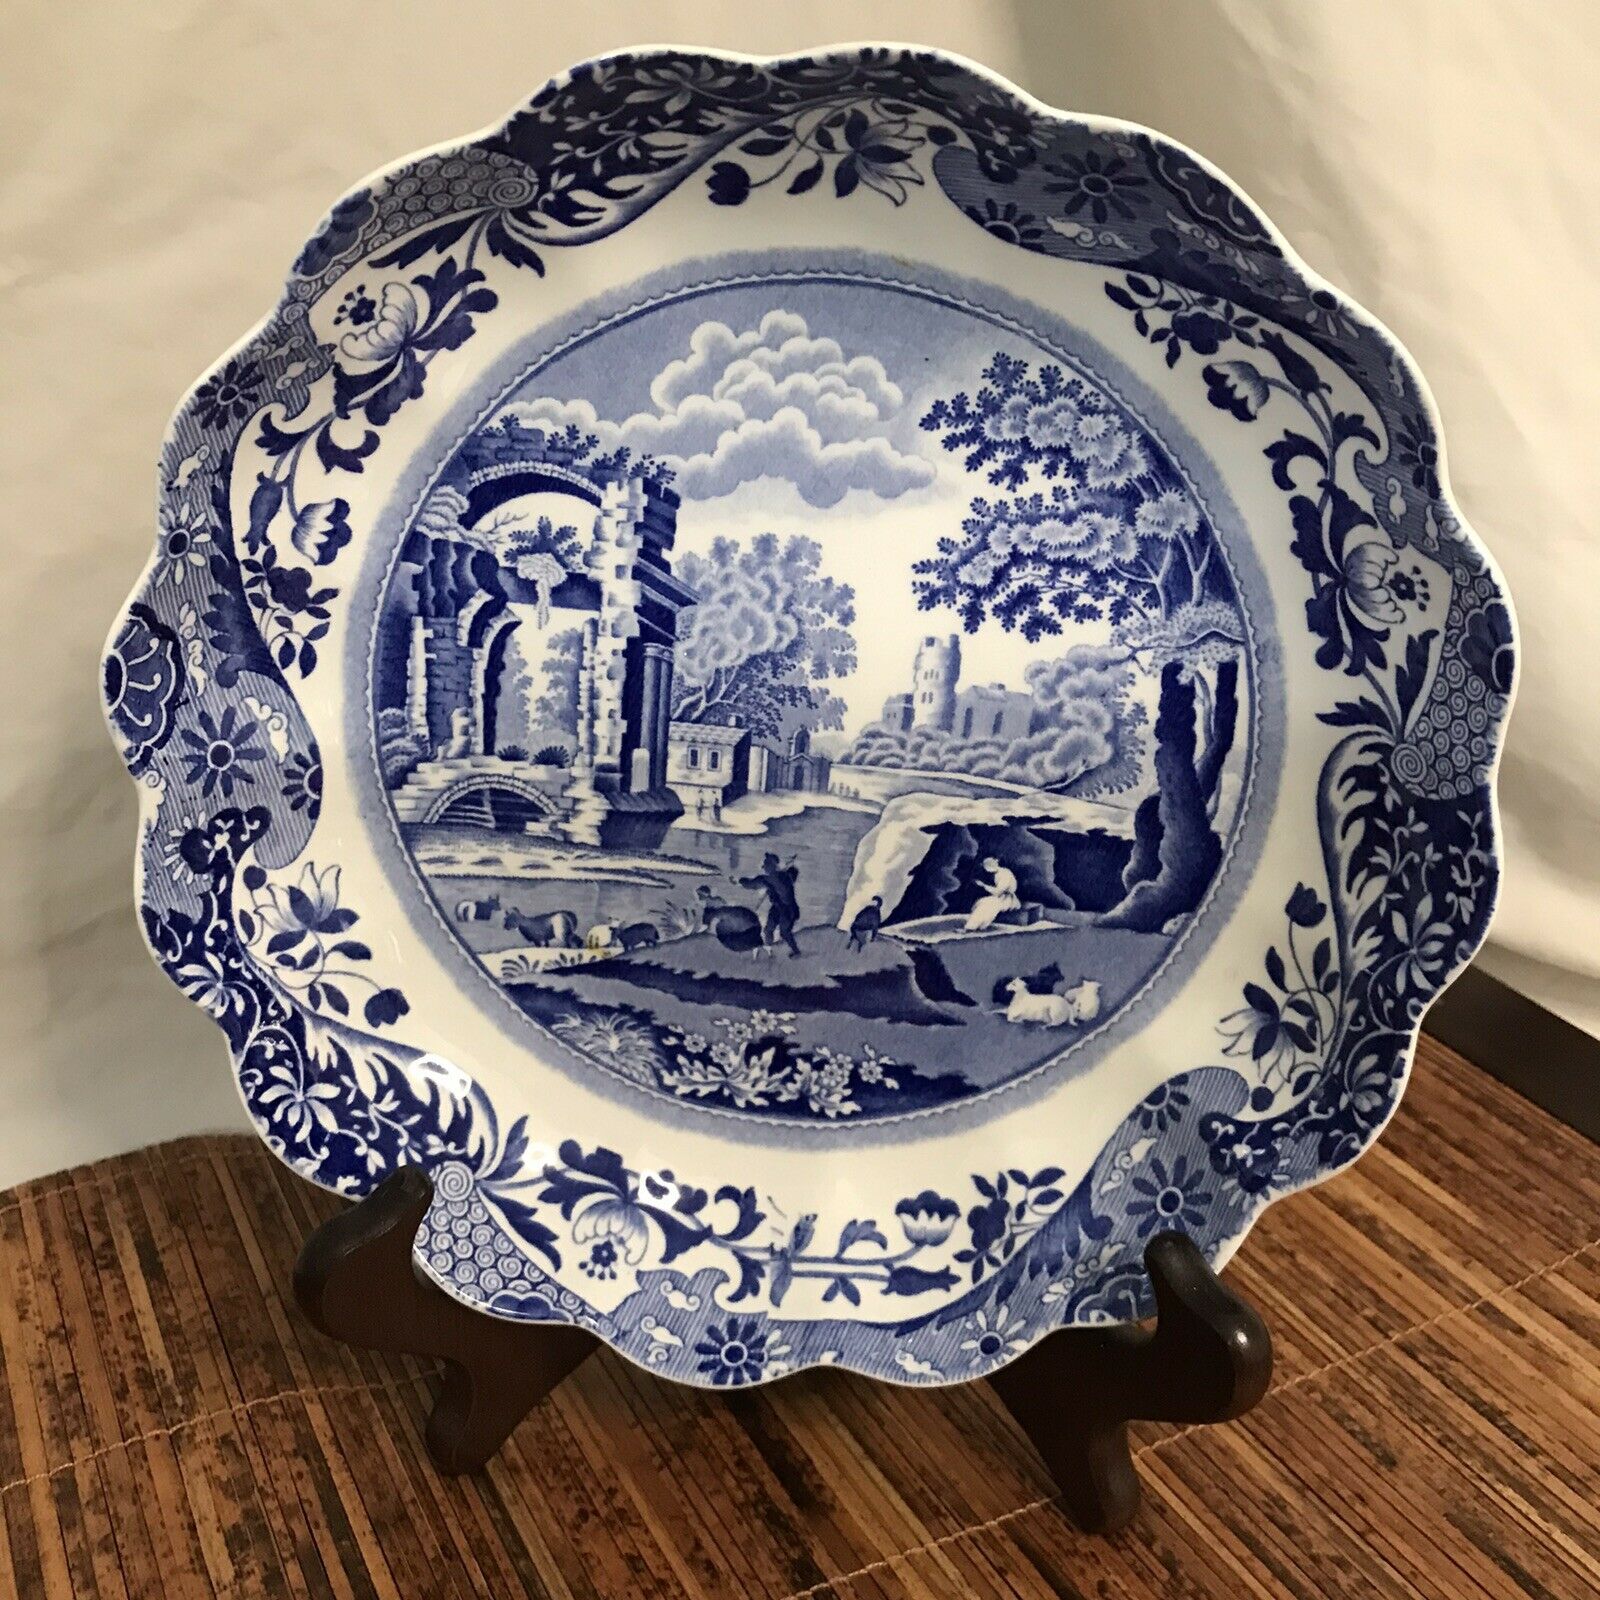 Vintage Spode Blue Italian Made in England 8 3/8” Dish Scalloped Edges